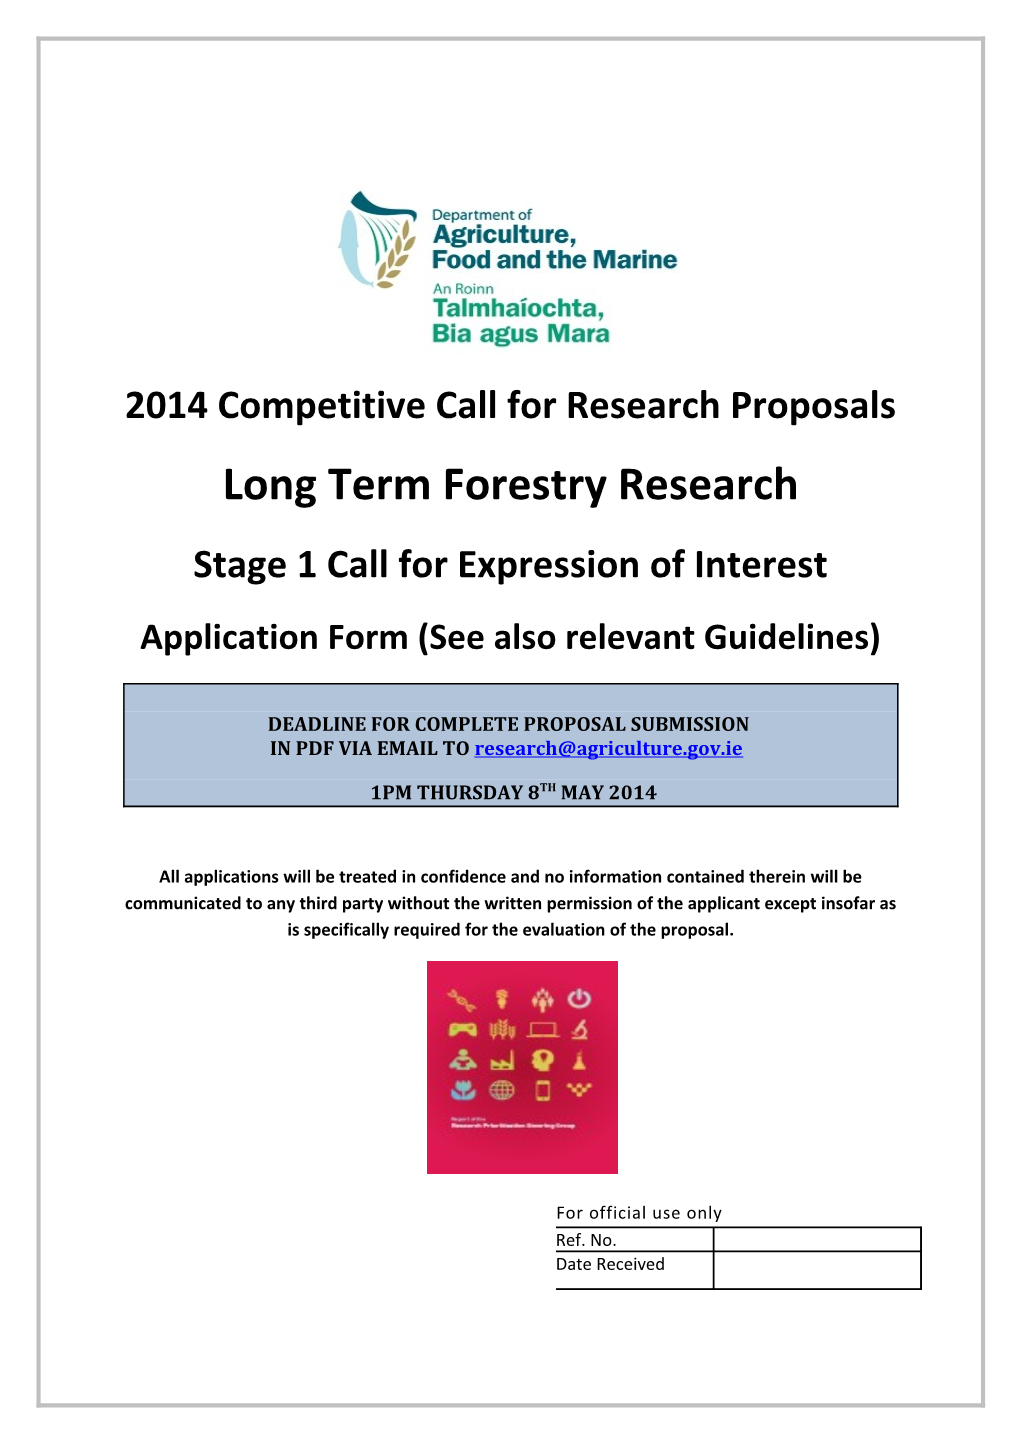 2014 Competitive Call for Research Proposals